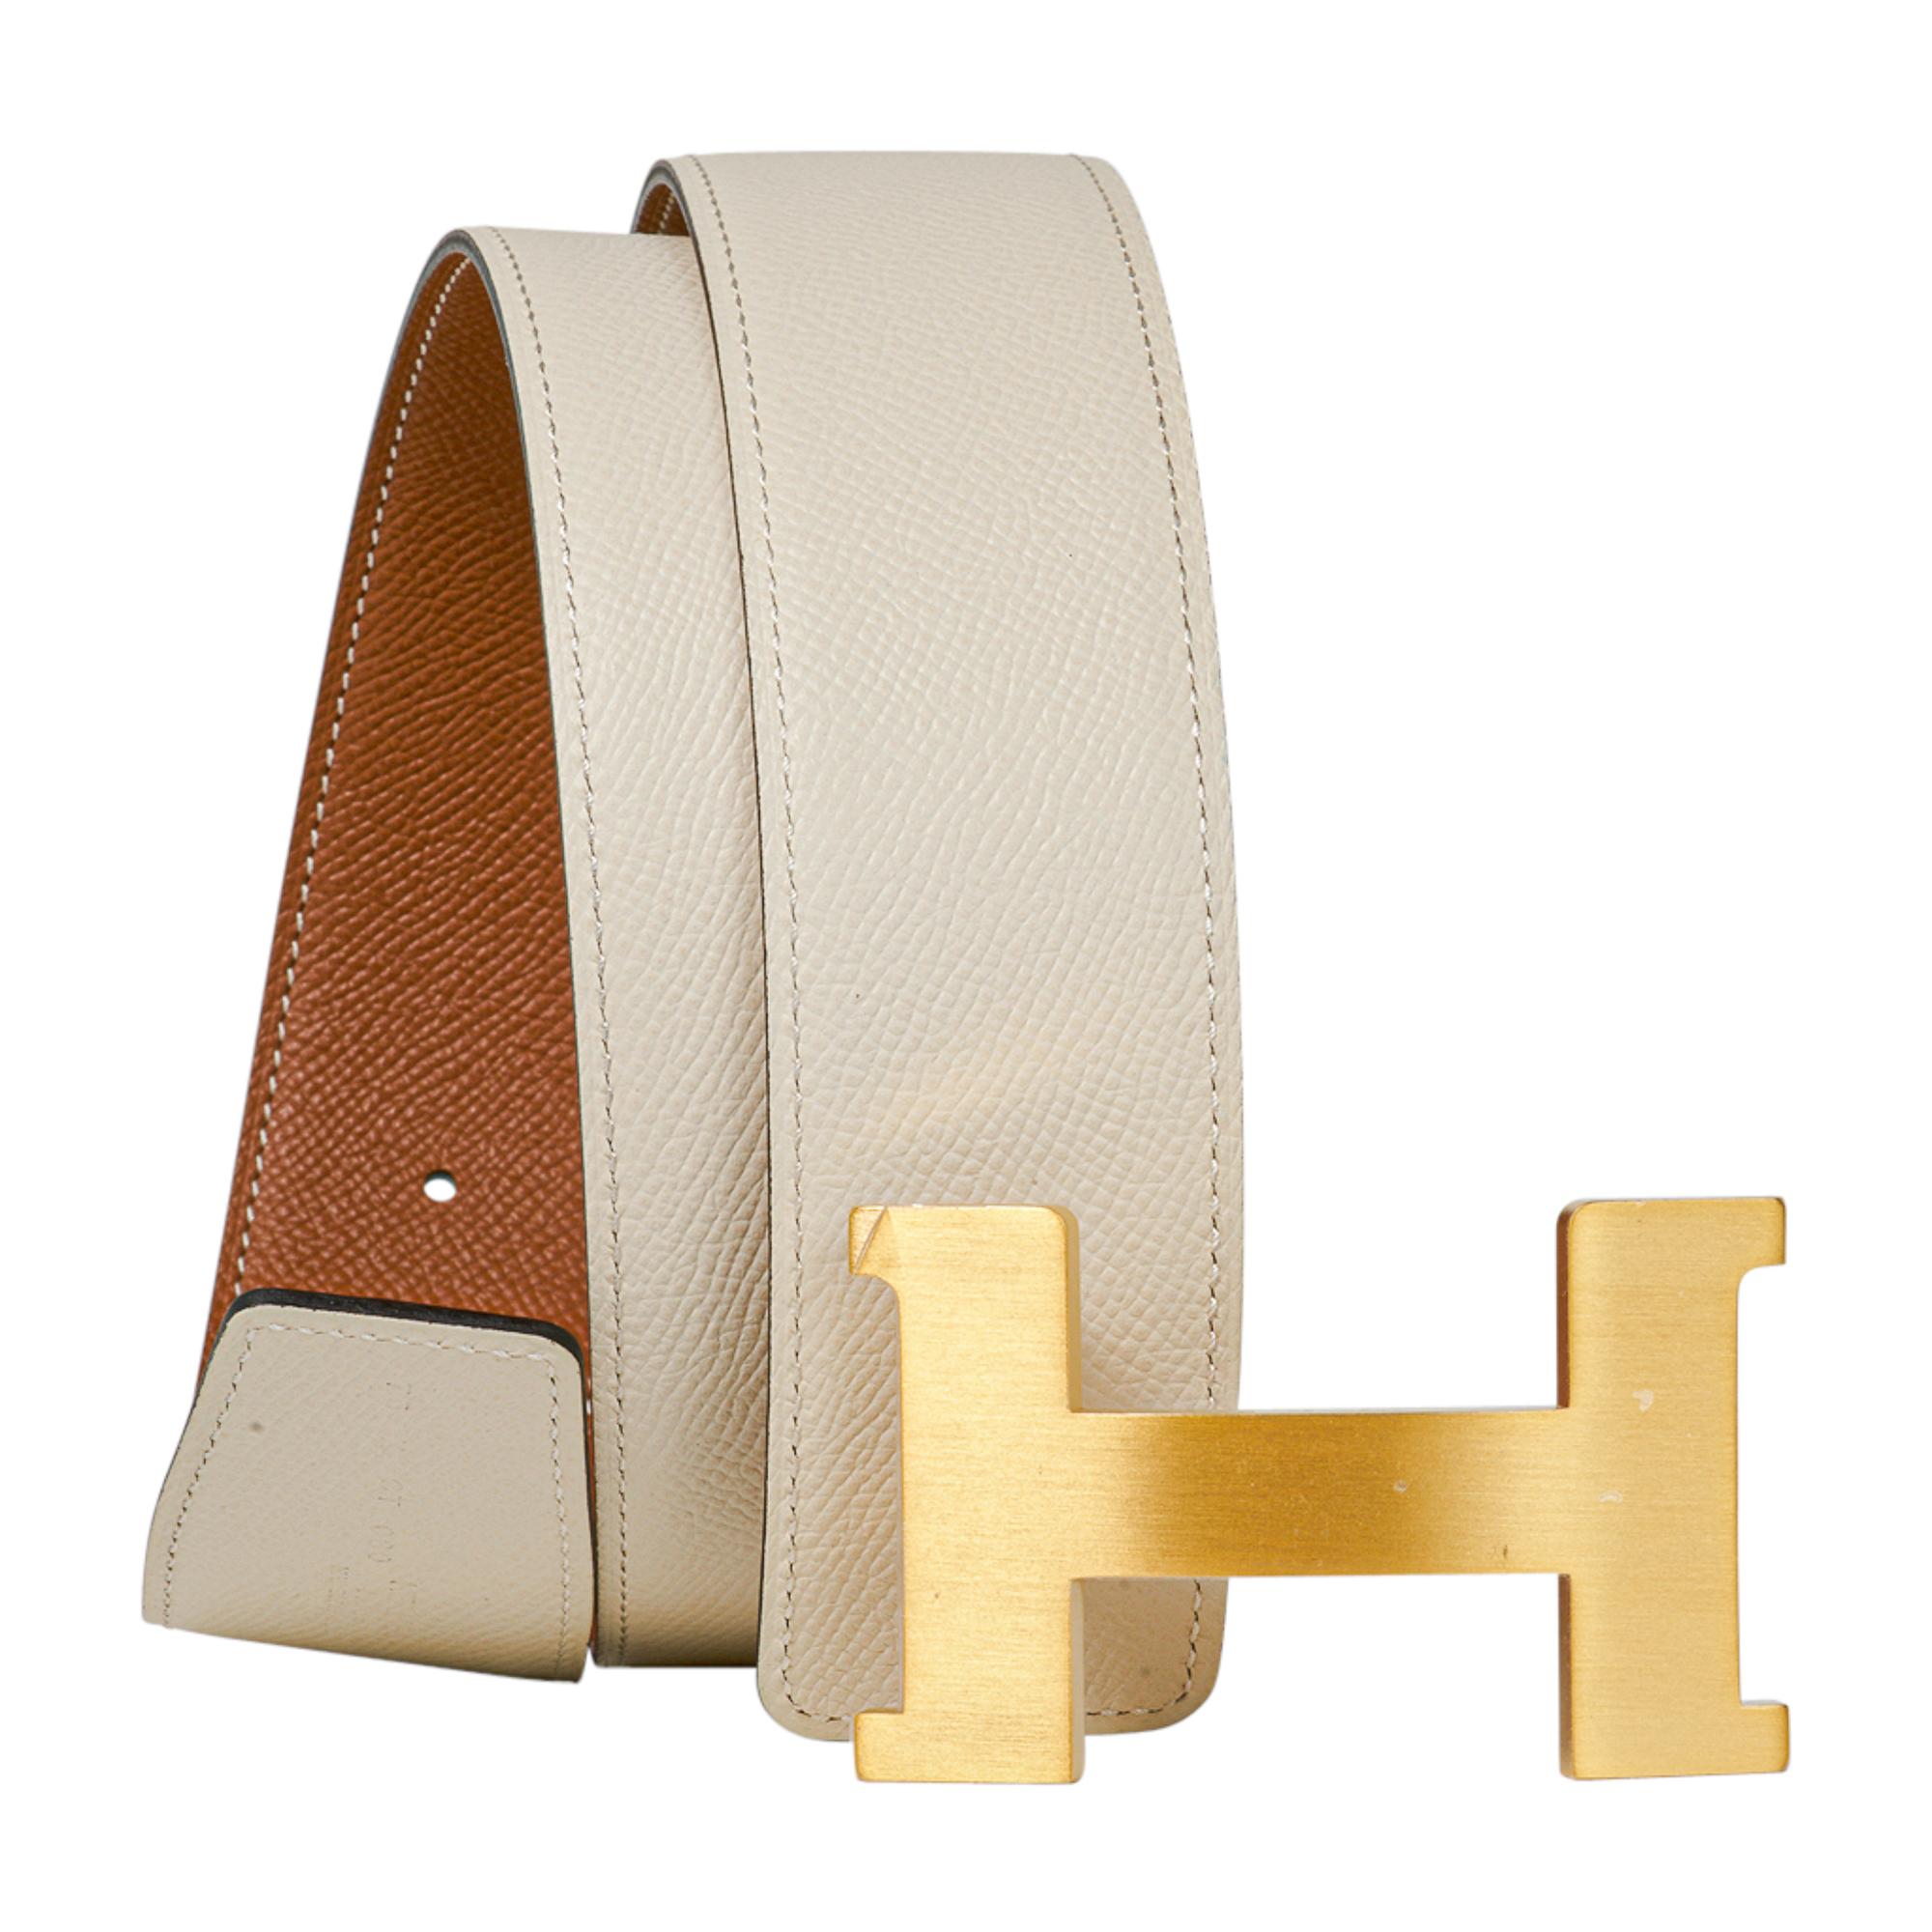 Guaranteed authentic Hermes Constance 42 mm belt features reversible Gold to Craie Epsom Leather.  
Fabulous over sized brushed Gold signature H buckle.  
Now a retired size, this is sure to become a collectors treasure. 
Signature HERMES PARIS MADE